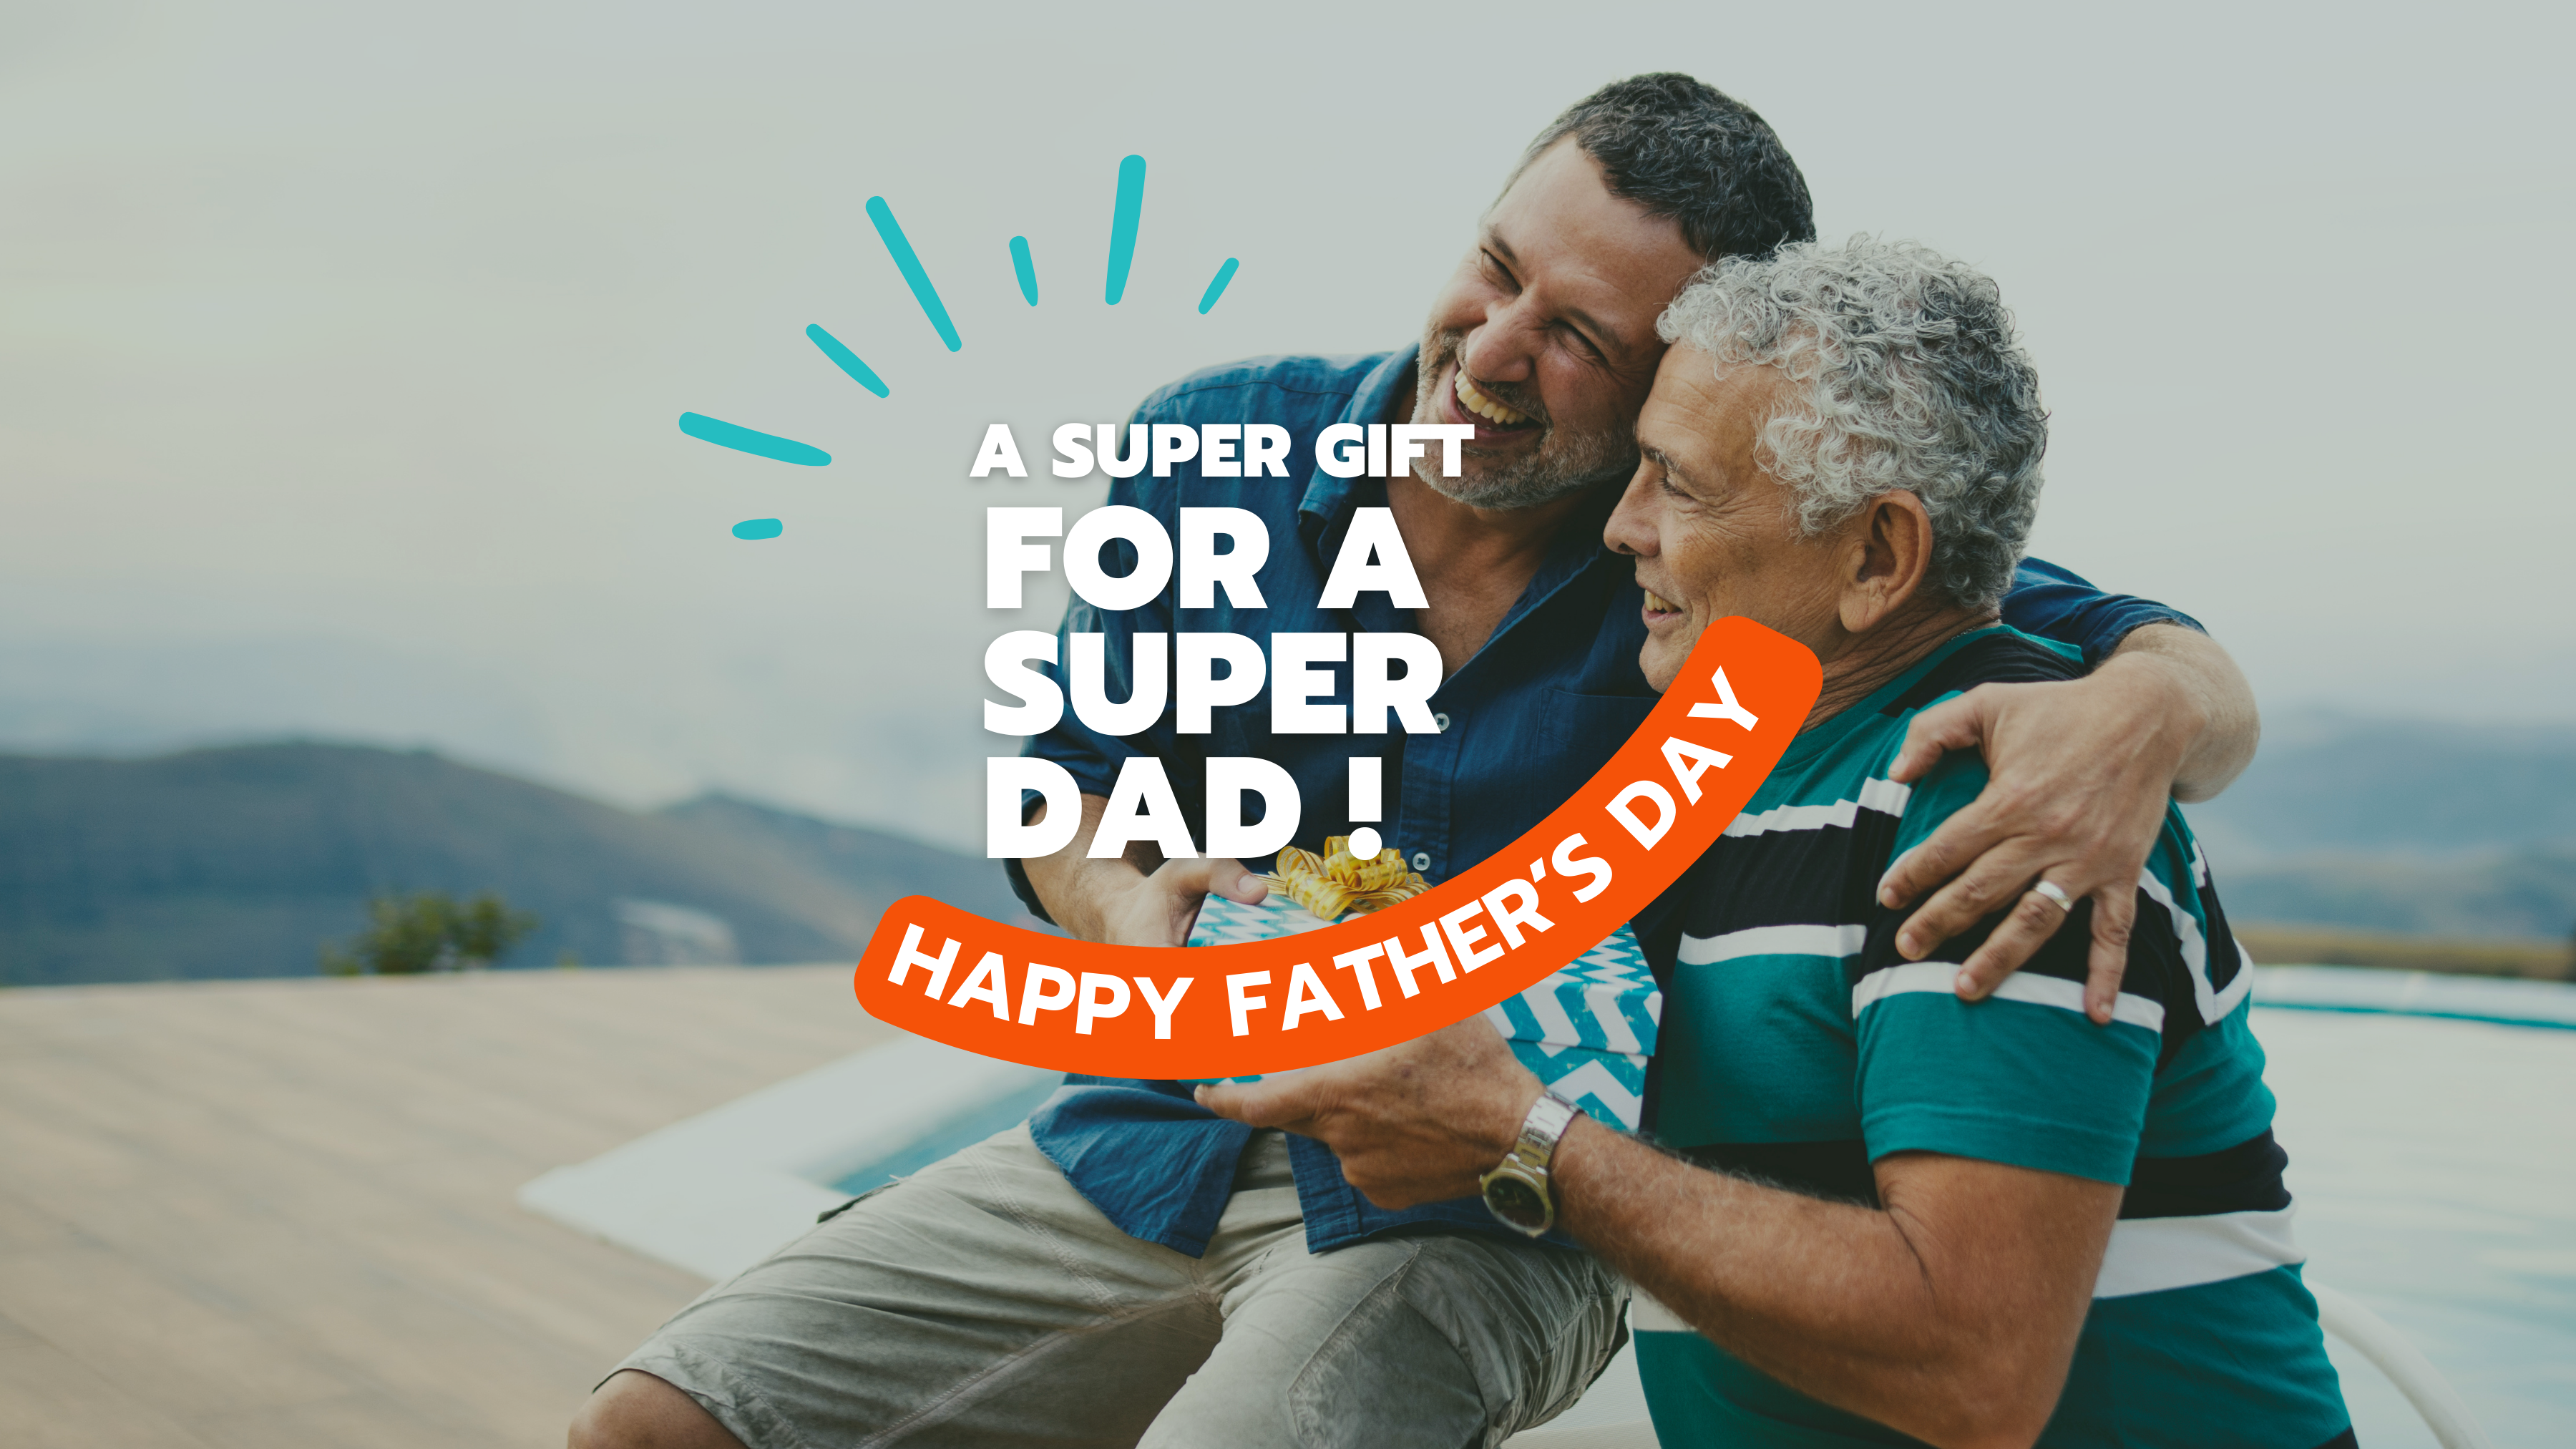 FATHER’S DAY IS HERE !